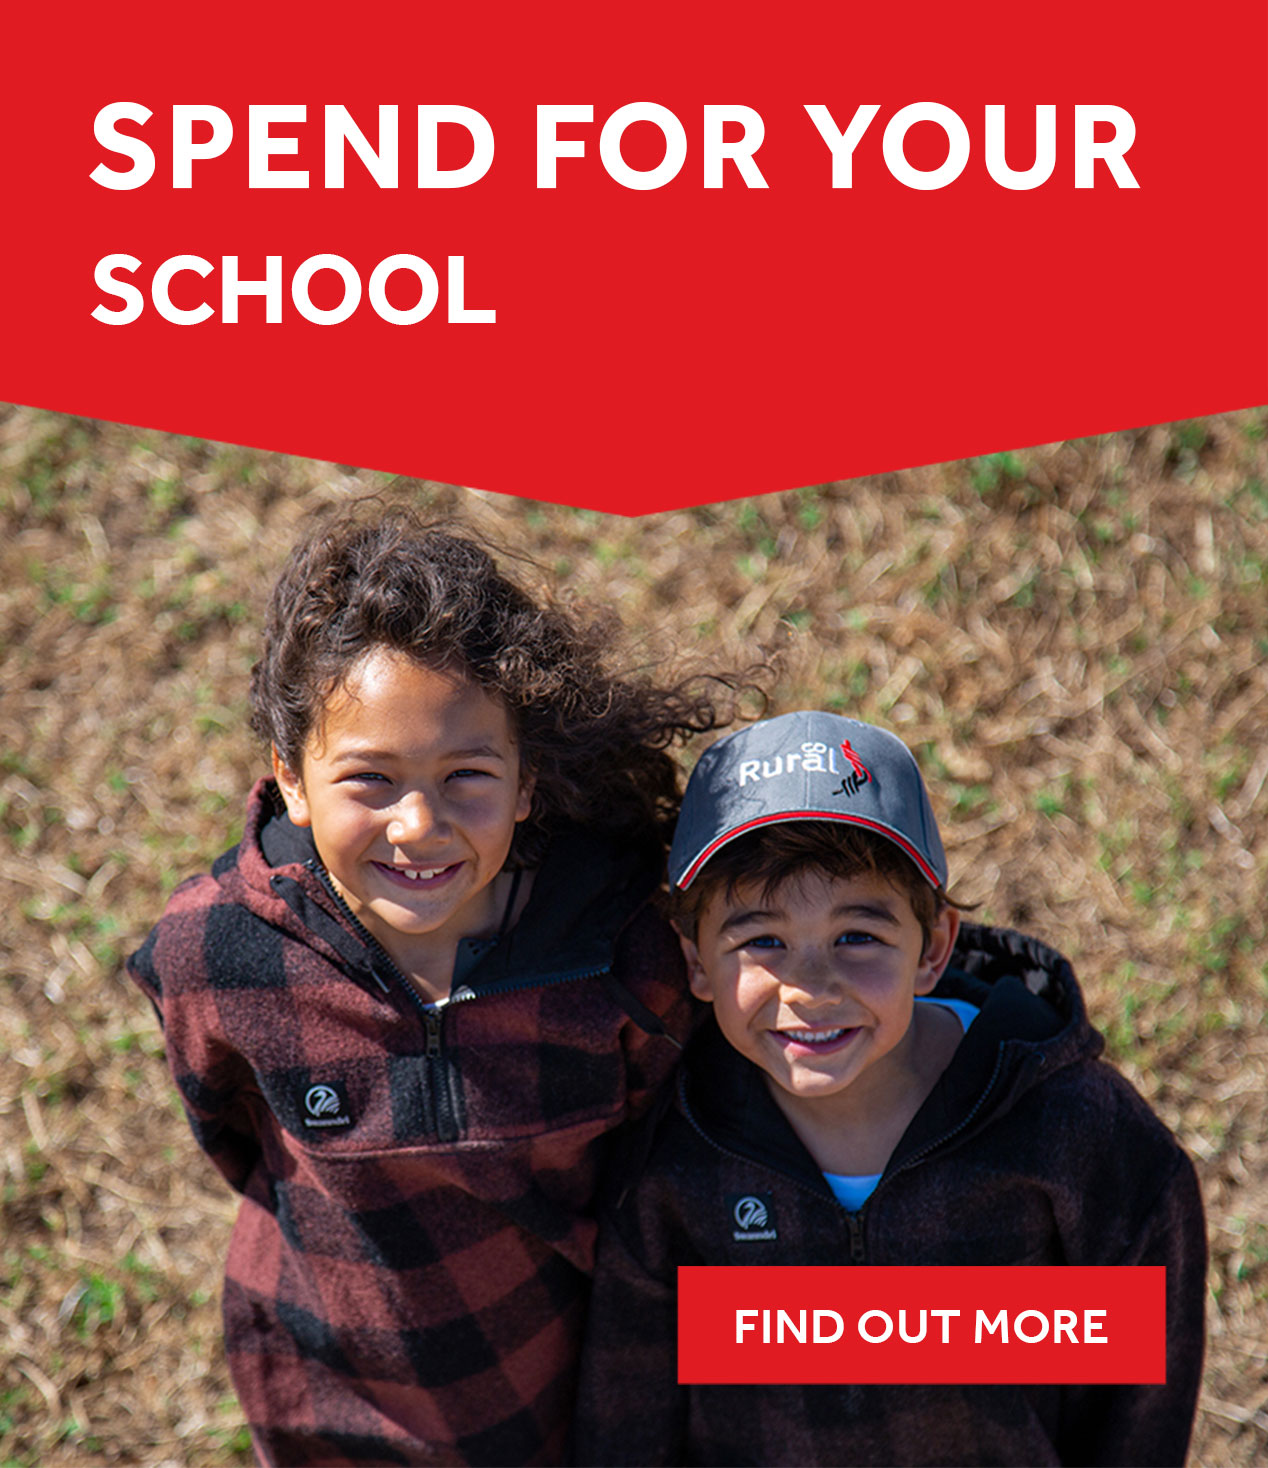 Spend for your school